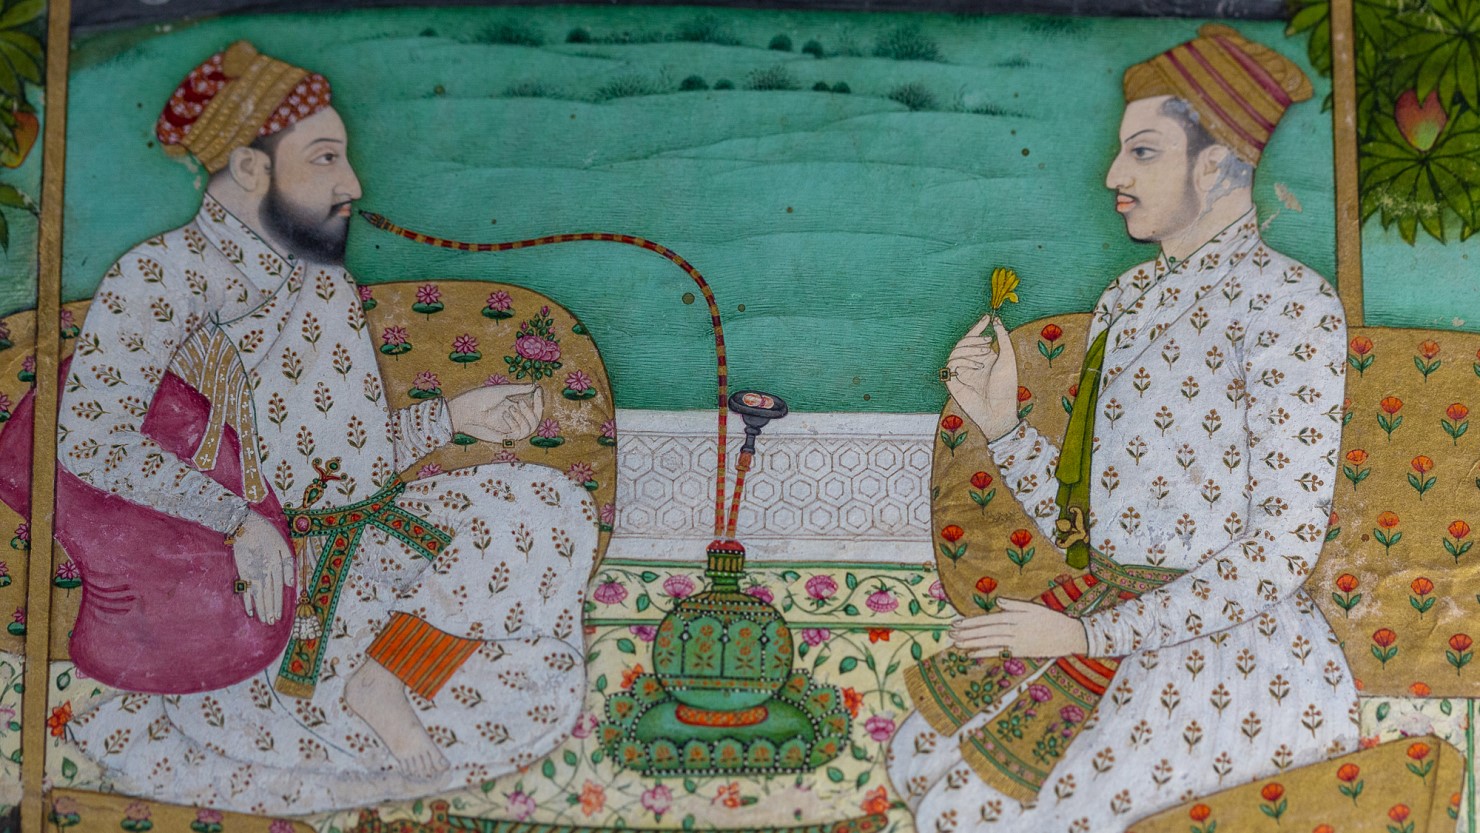 Detail from a painting showing two men sat facing each other on the floor.